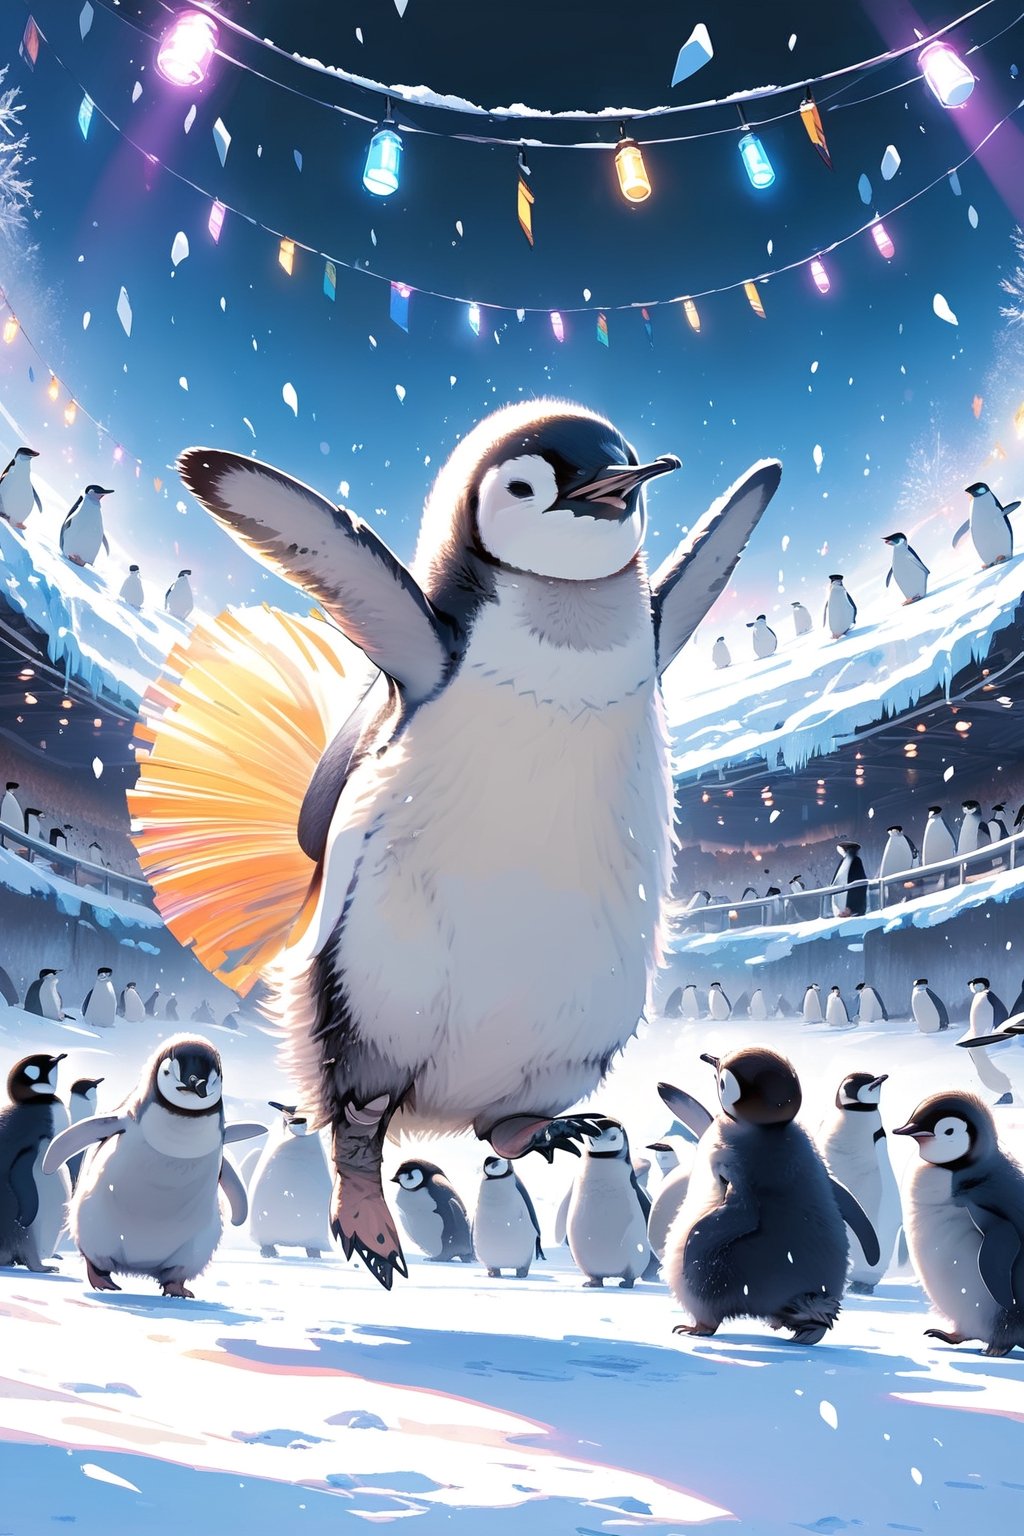 //quality, (masterpiece:1.331), (detailed), ((,best quality,)),//,close up to penguins,lots of dancing penguins, (too many dancing penguins:1.3), (dancing:1.4),cute, adorable,(dynamic pose),(one feet_up),scenery,ice,ice land,ice and snow,Penguin ,Bird,Animal ,dynamic angle,3D cartoon, (on the stage:1.3),(colorful lights:1.2),audience under the stage, outdoor concert, 